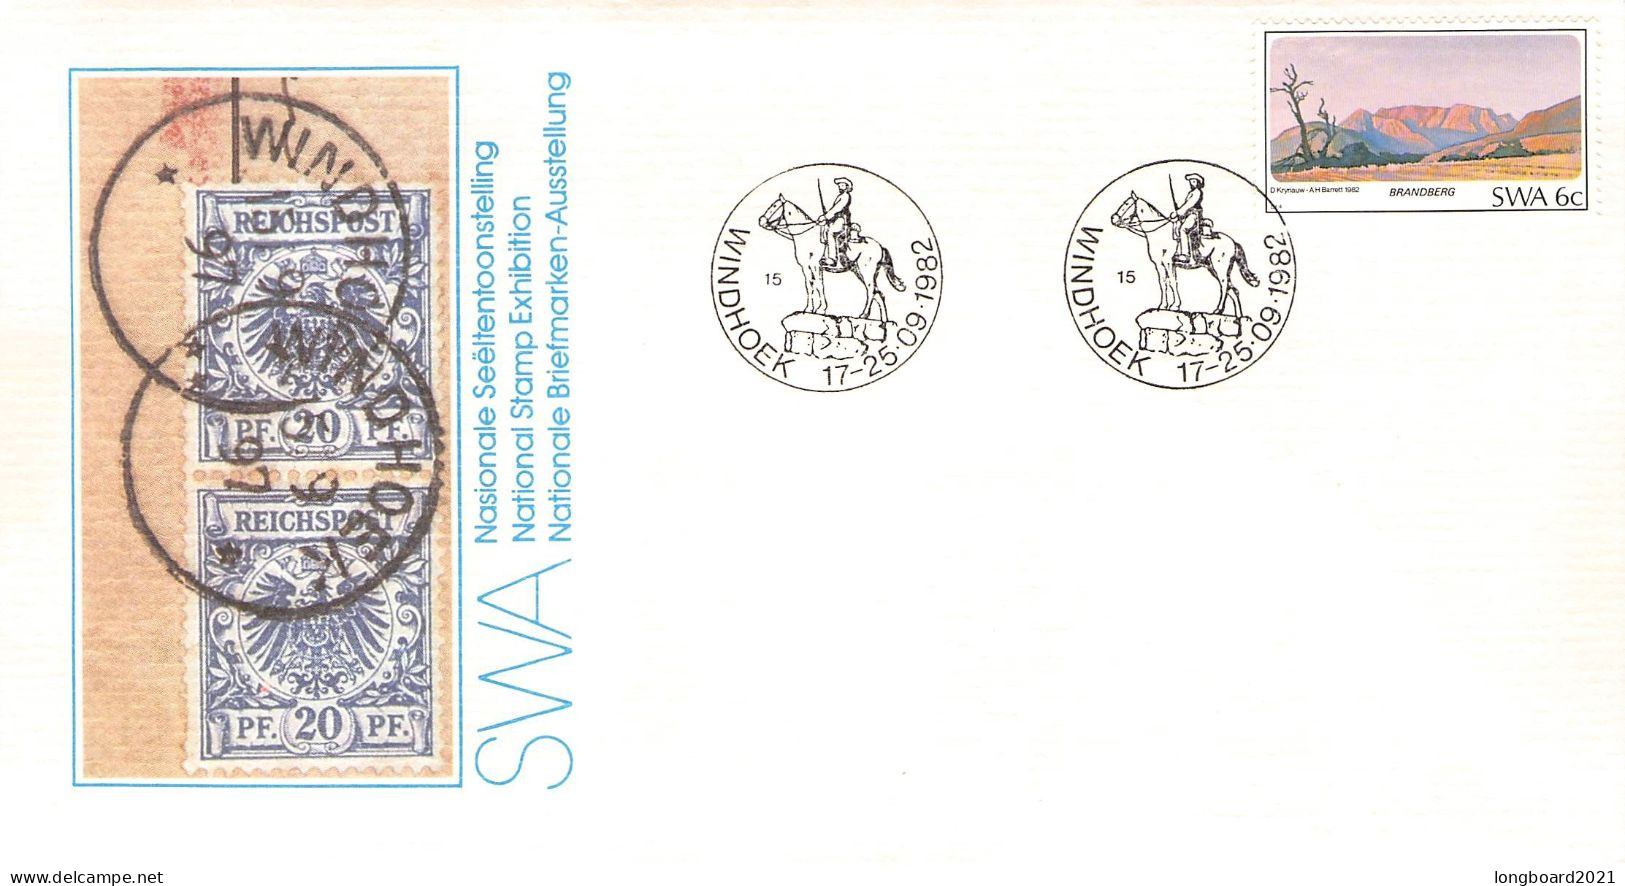 SOUTH WEST AFRICA - 1982 NATIONAL STAMP EXHIBITION  /*27 - Südwestafrika (1923-1990)